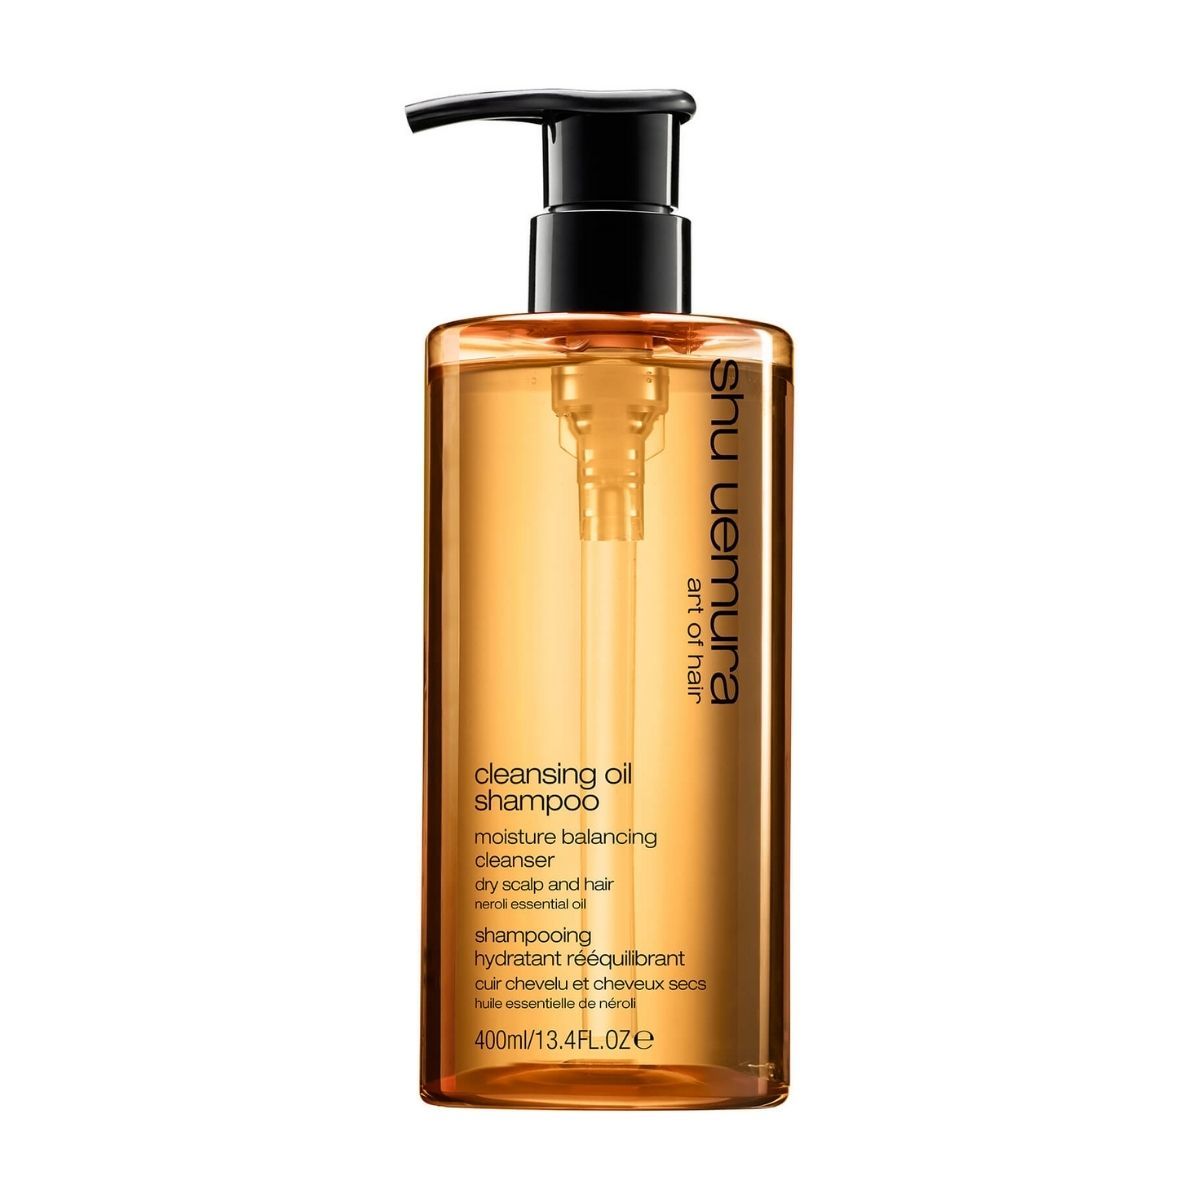 Cleansing Oil Shampoo Moisture Balancing Cleanser 2